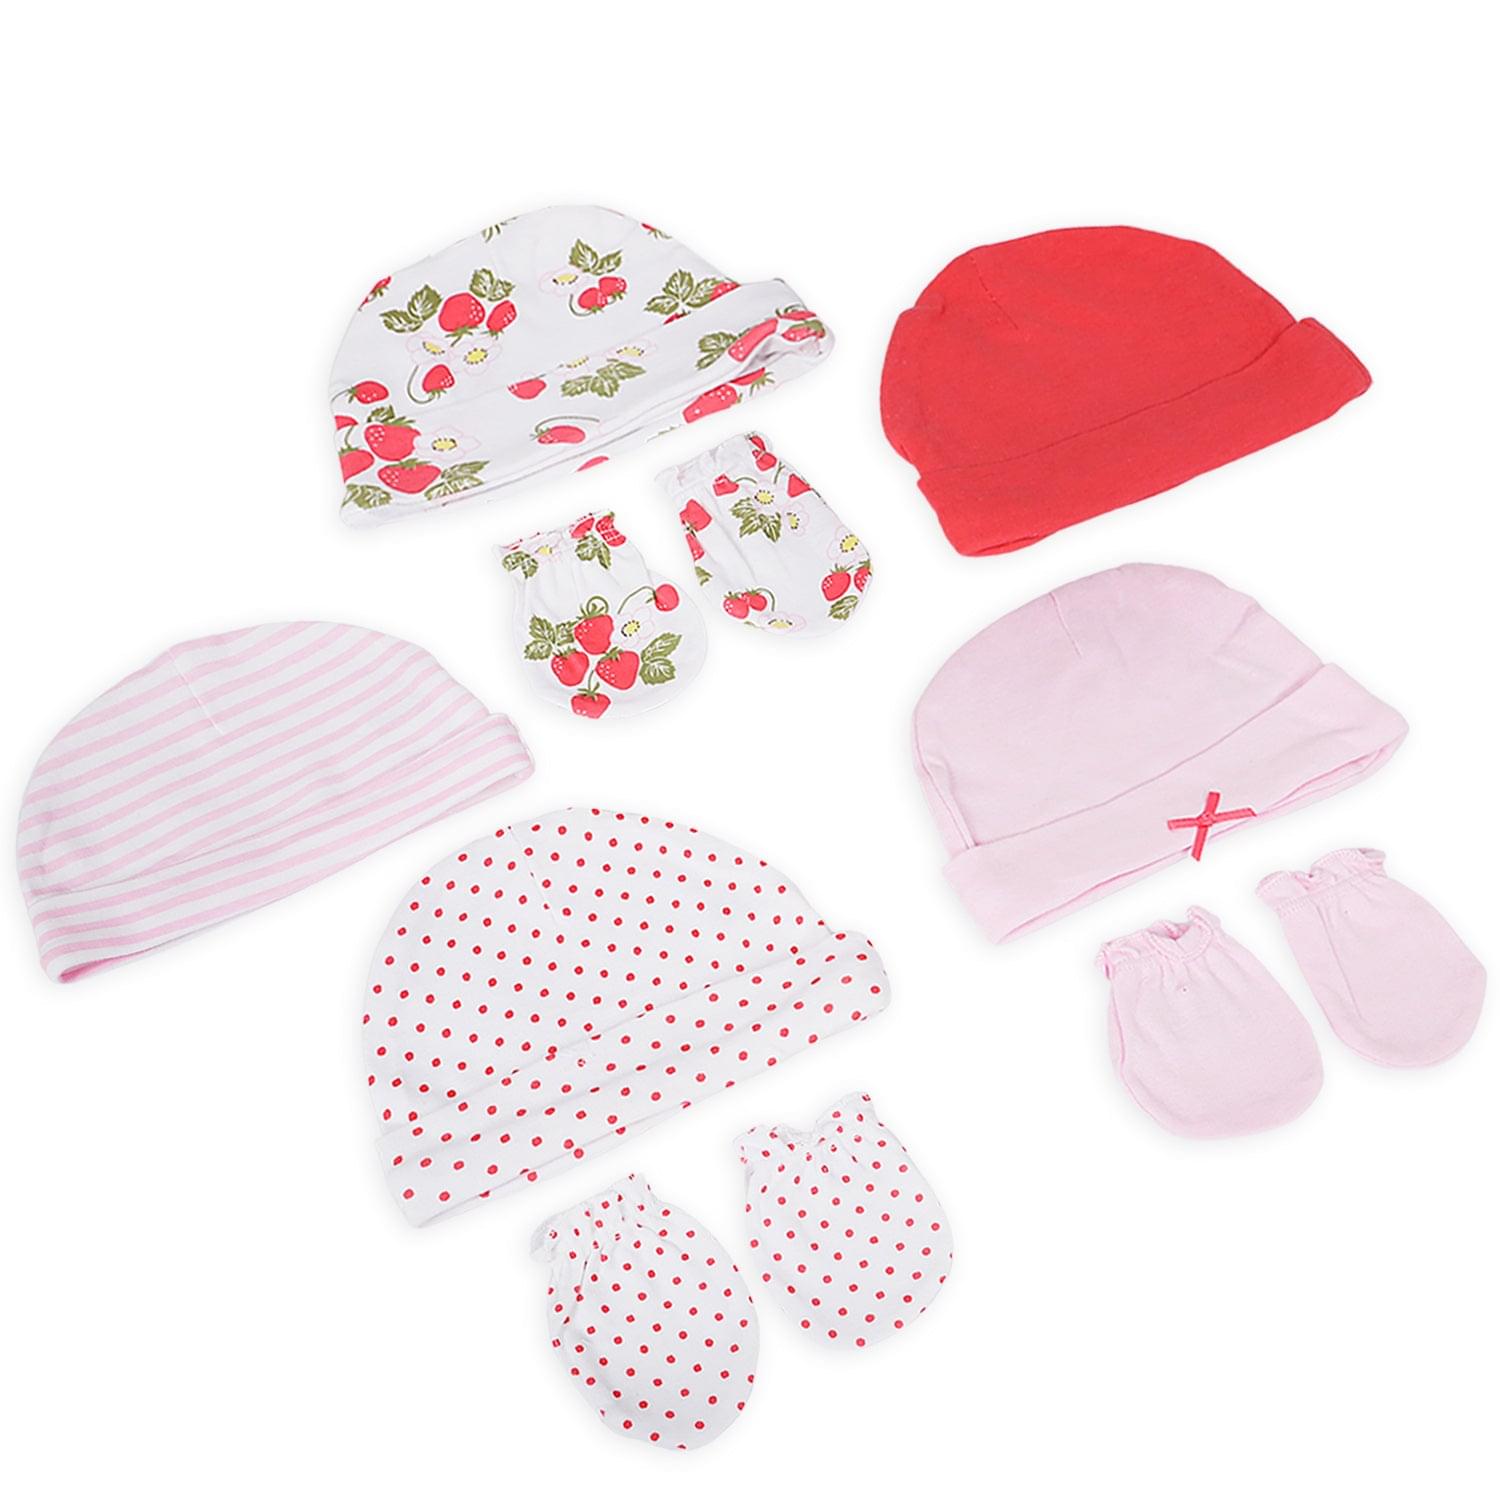 5 Caps And 3 Pair Mittens Gift Set Polka Dots Pink Red White - Baby Moo